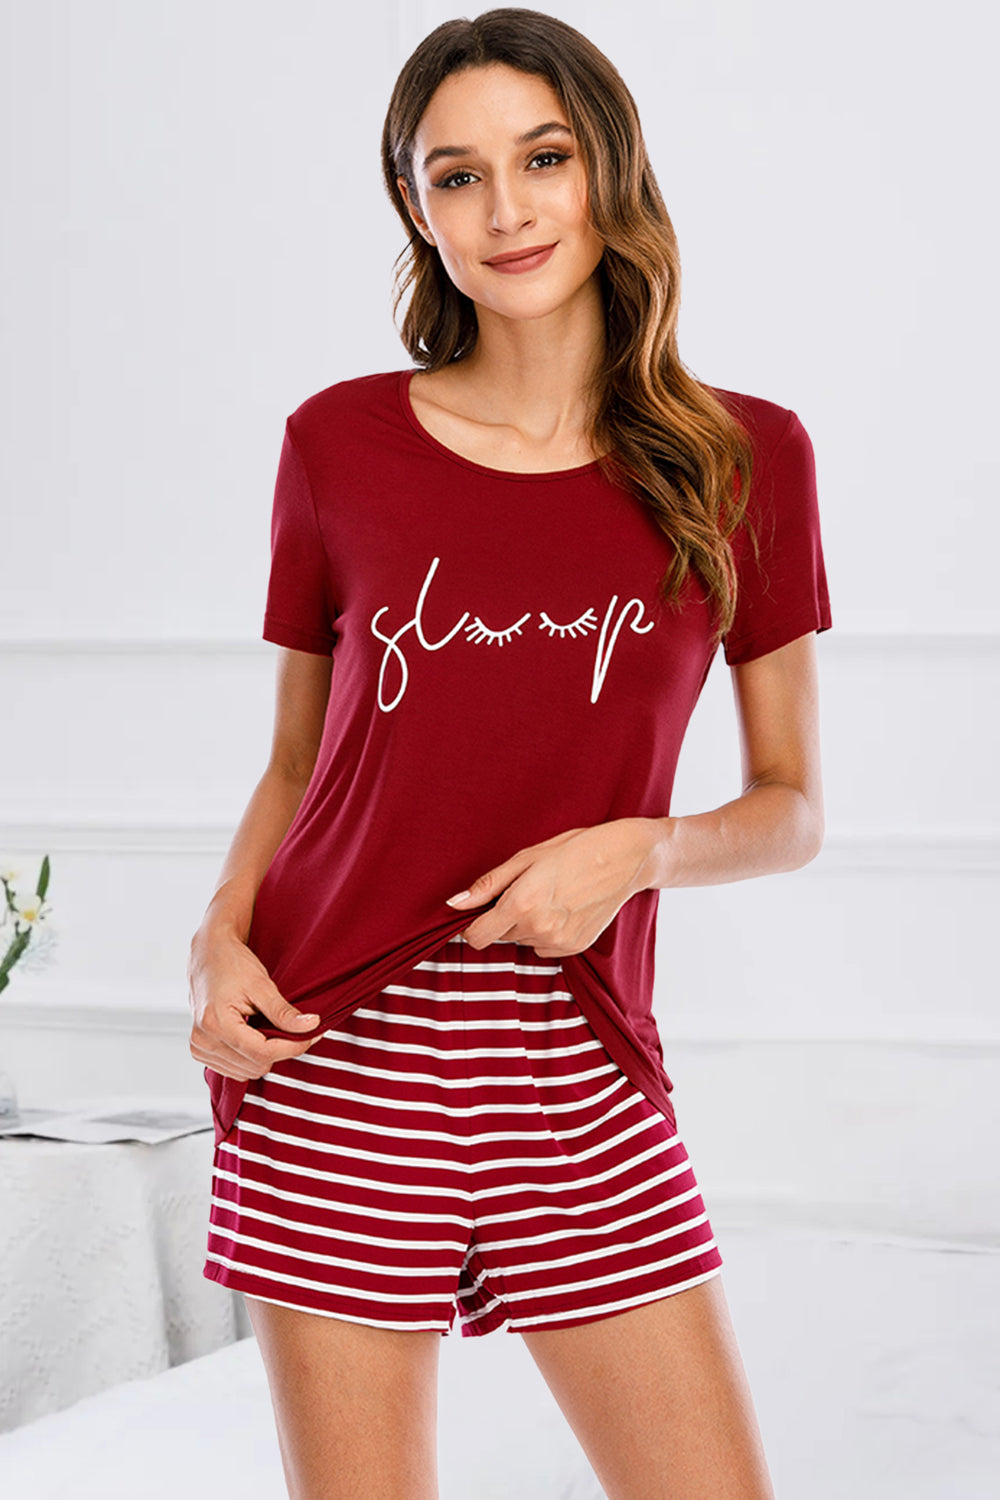 Graphic Round Neck Top and Striped Shorts Lounge Set Loungewear Krazy Heart Designs Boutique Scarlet S 